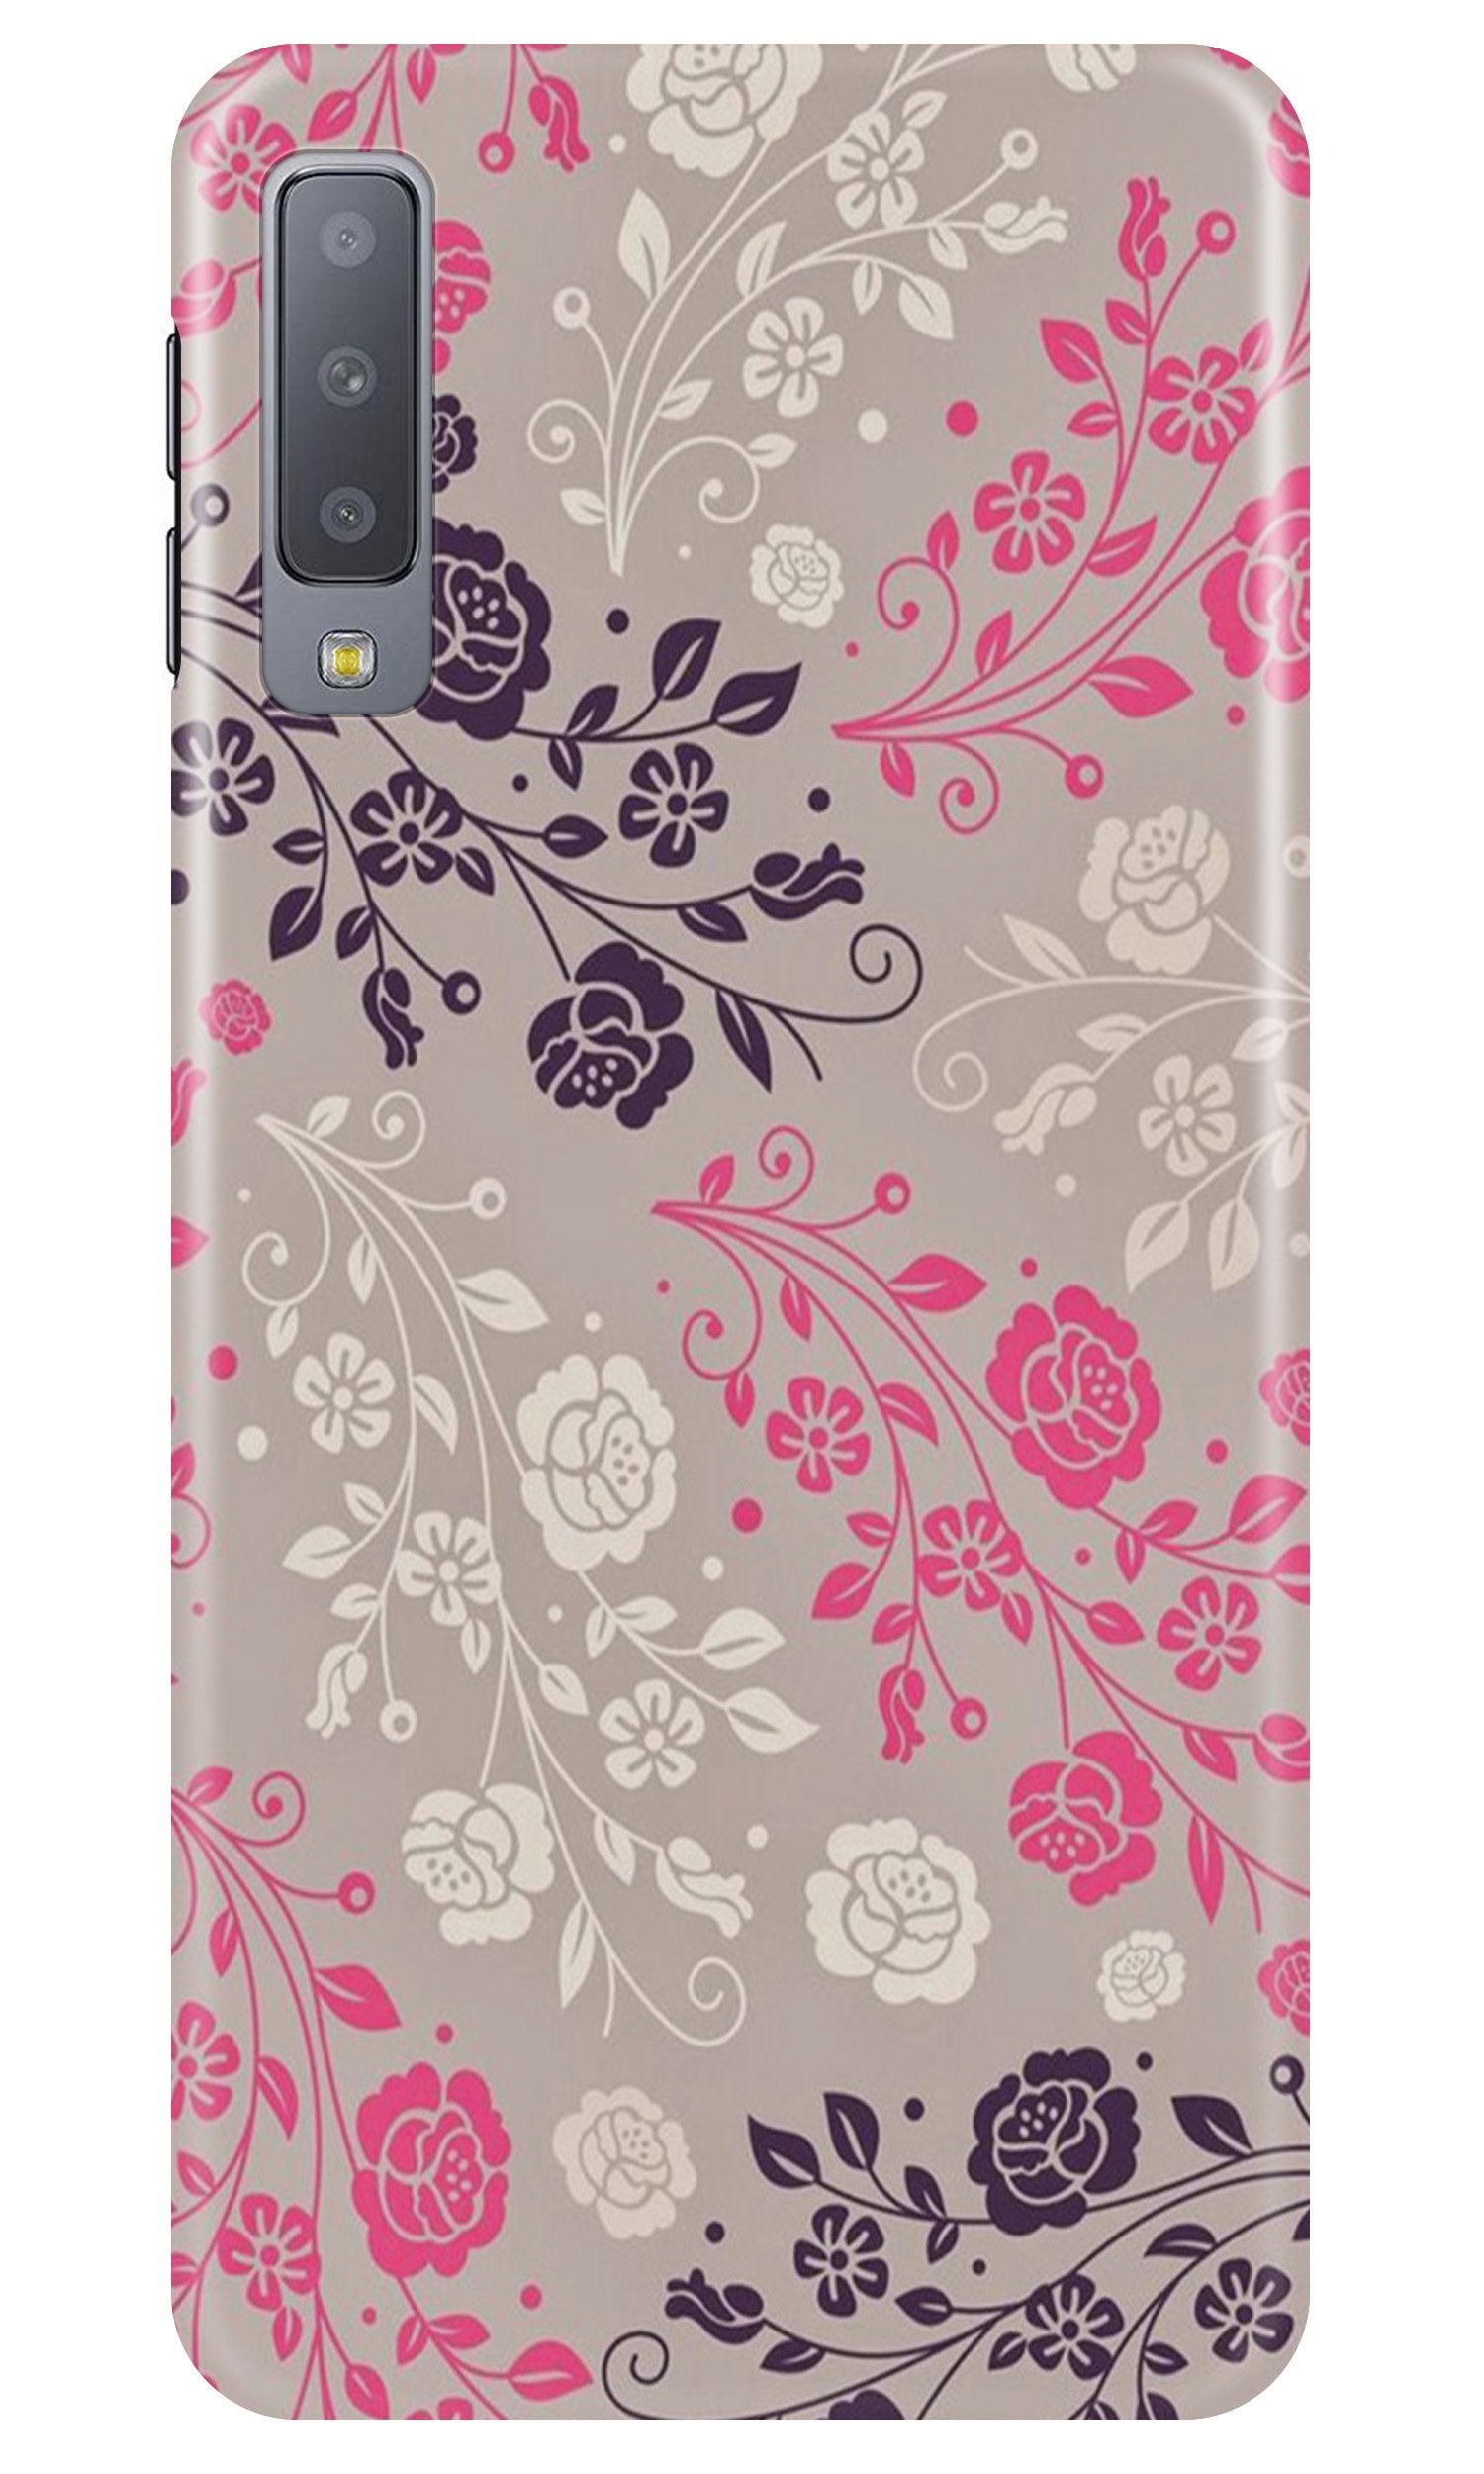 Pattern2 Case for Samsung Galaxy A30s